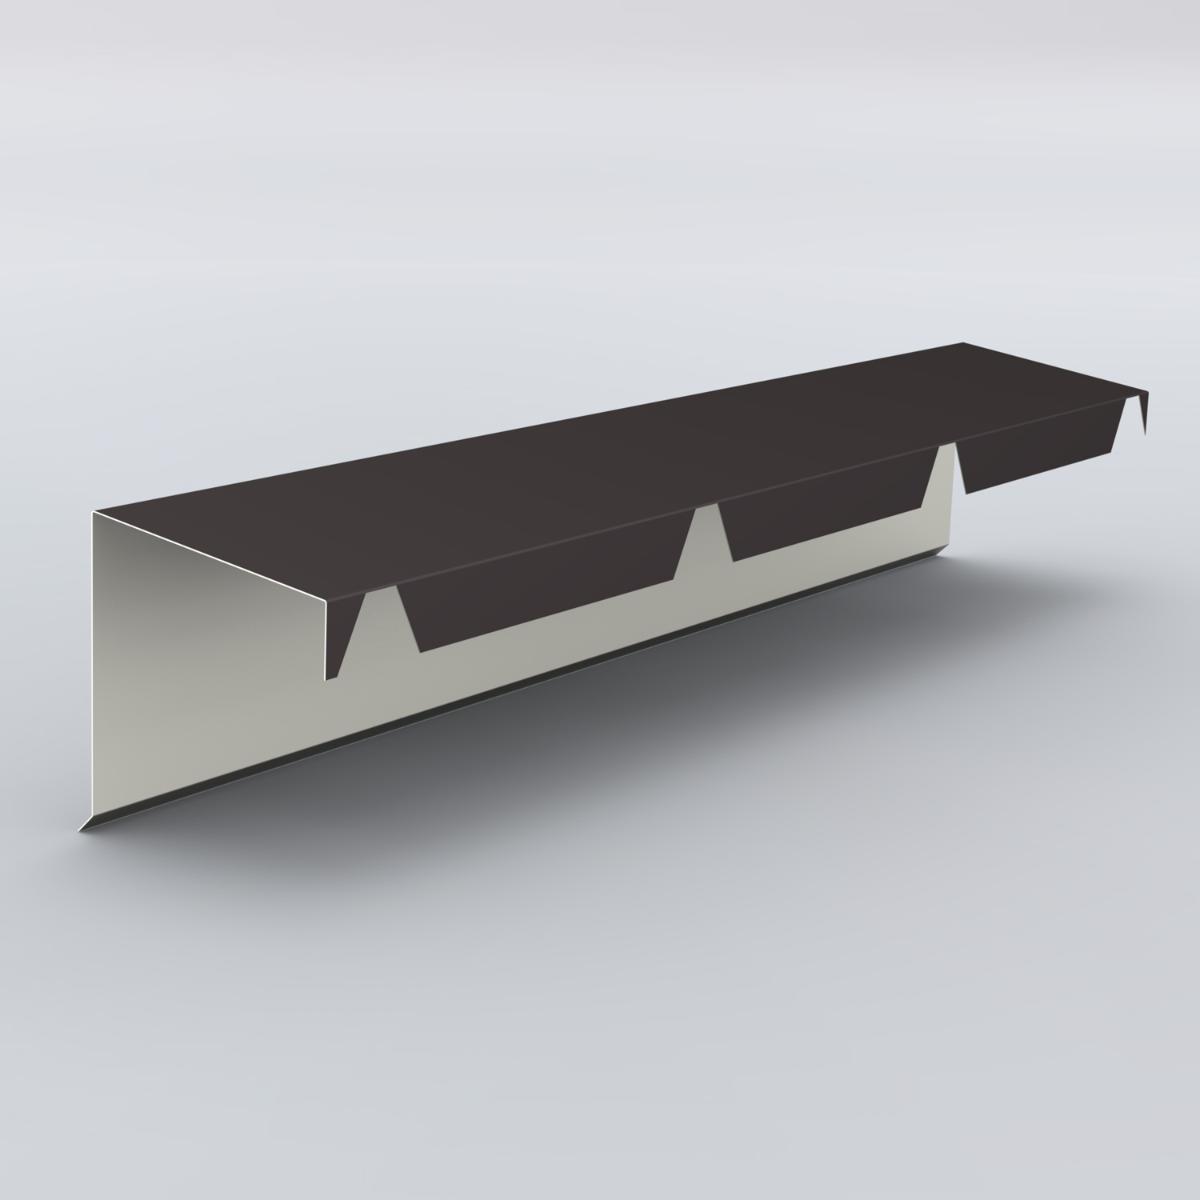 Ridge course toothed 33 R8019 D400 2100mm